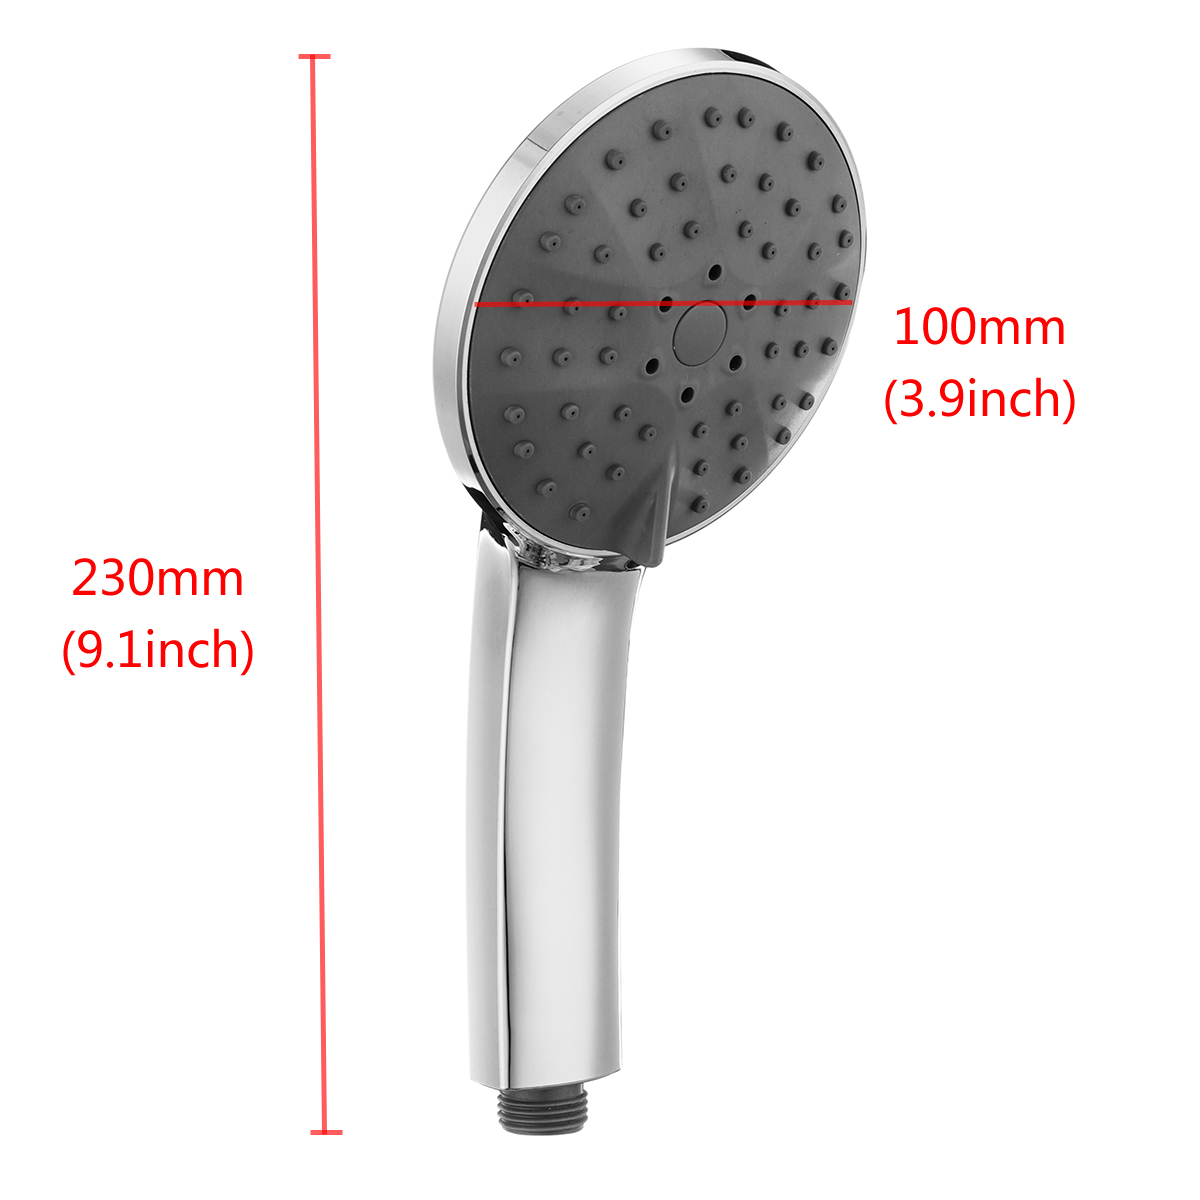 Multi-Function-Bathroom-Shower-Head-4-Mode-Spray-With-Bidet-Function-Wall-Mounted-1398094